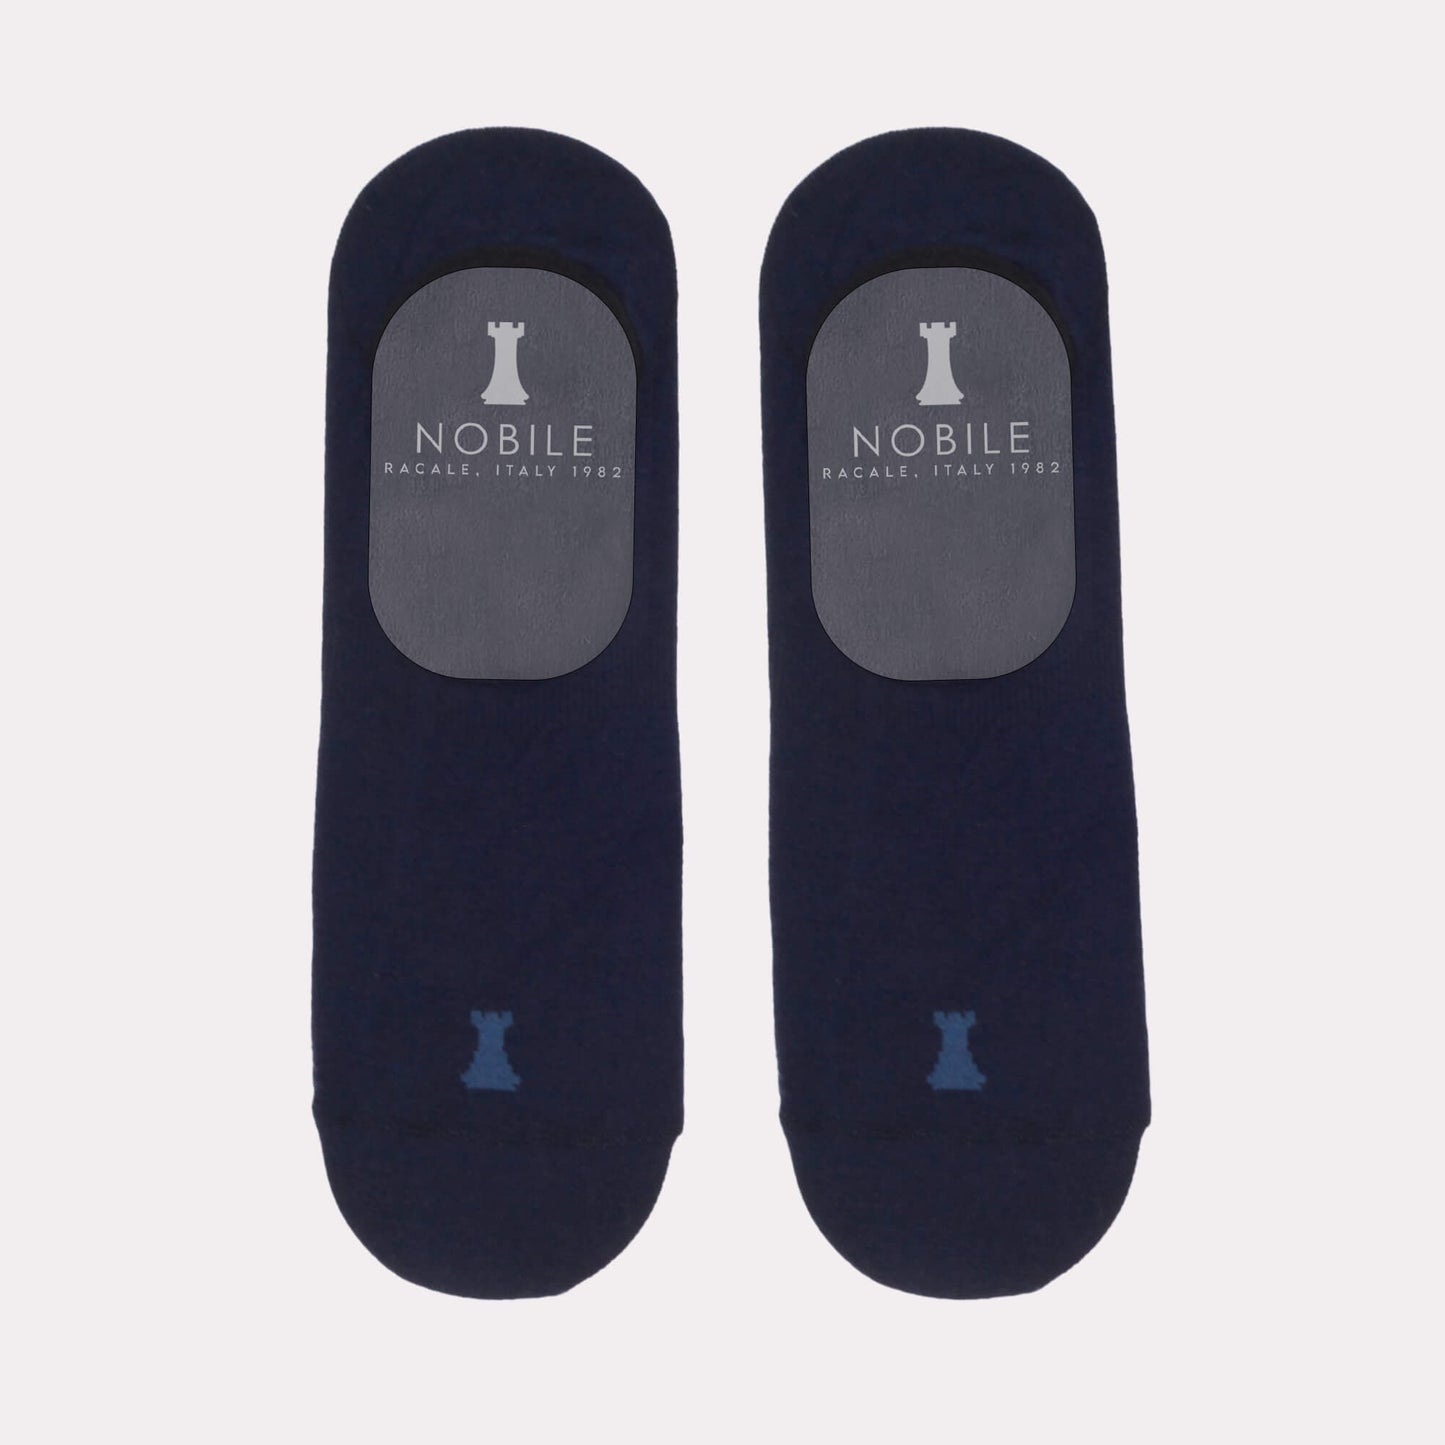 No show socks 6 pairs - Solid Navy Blue